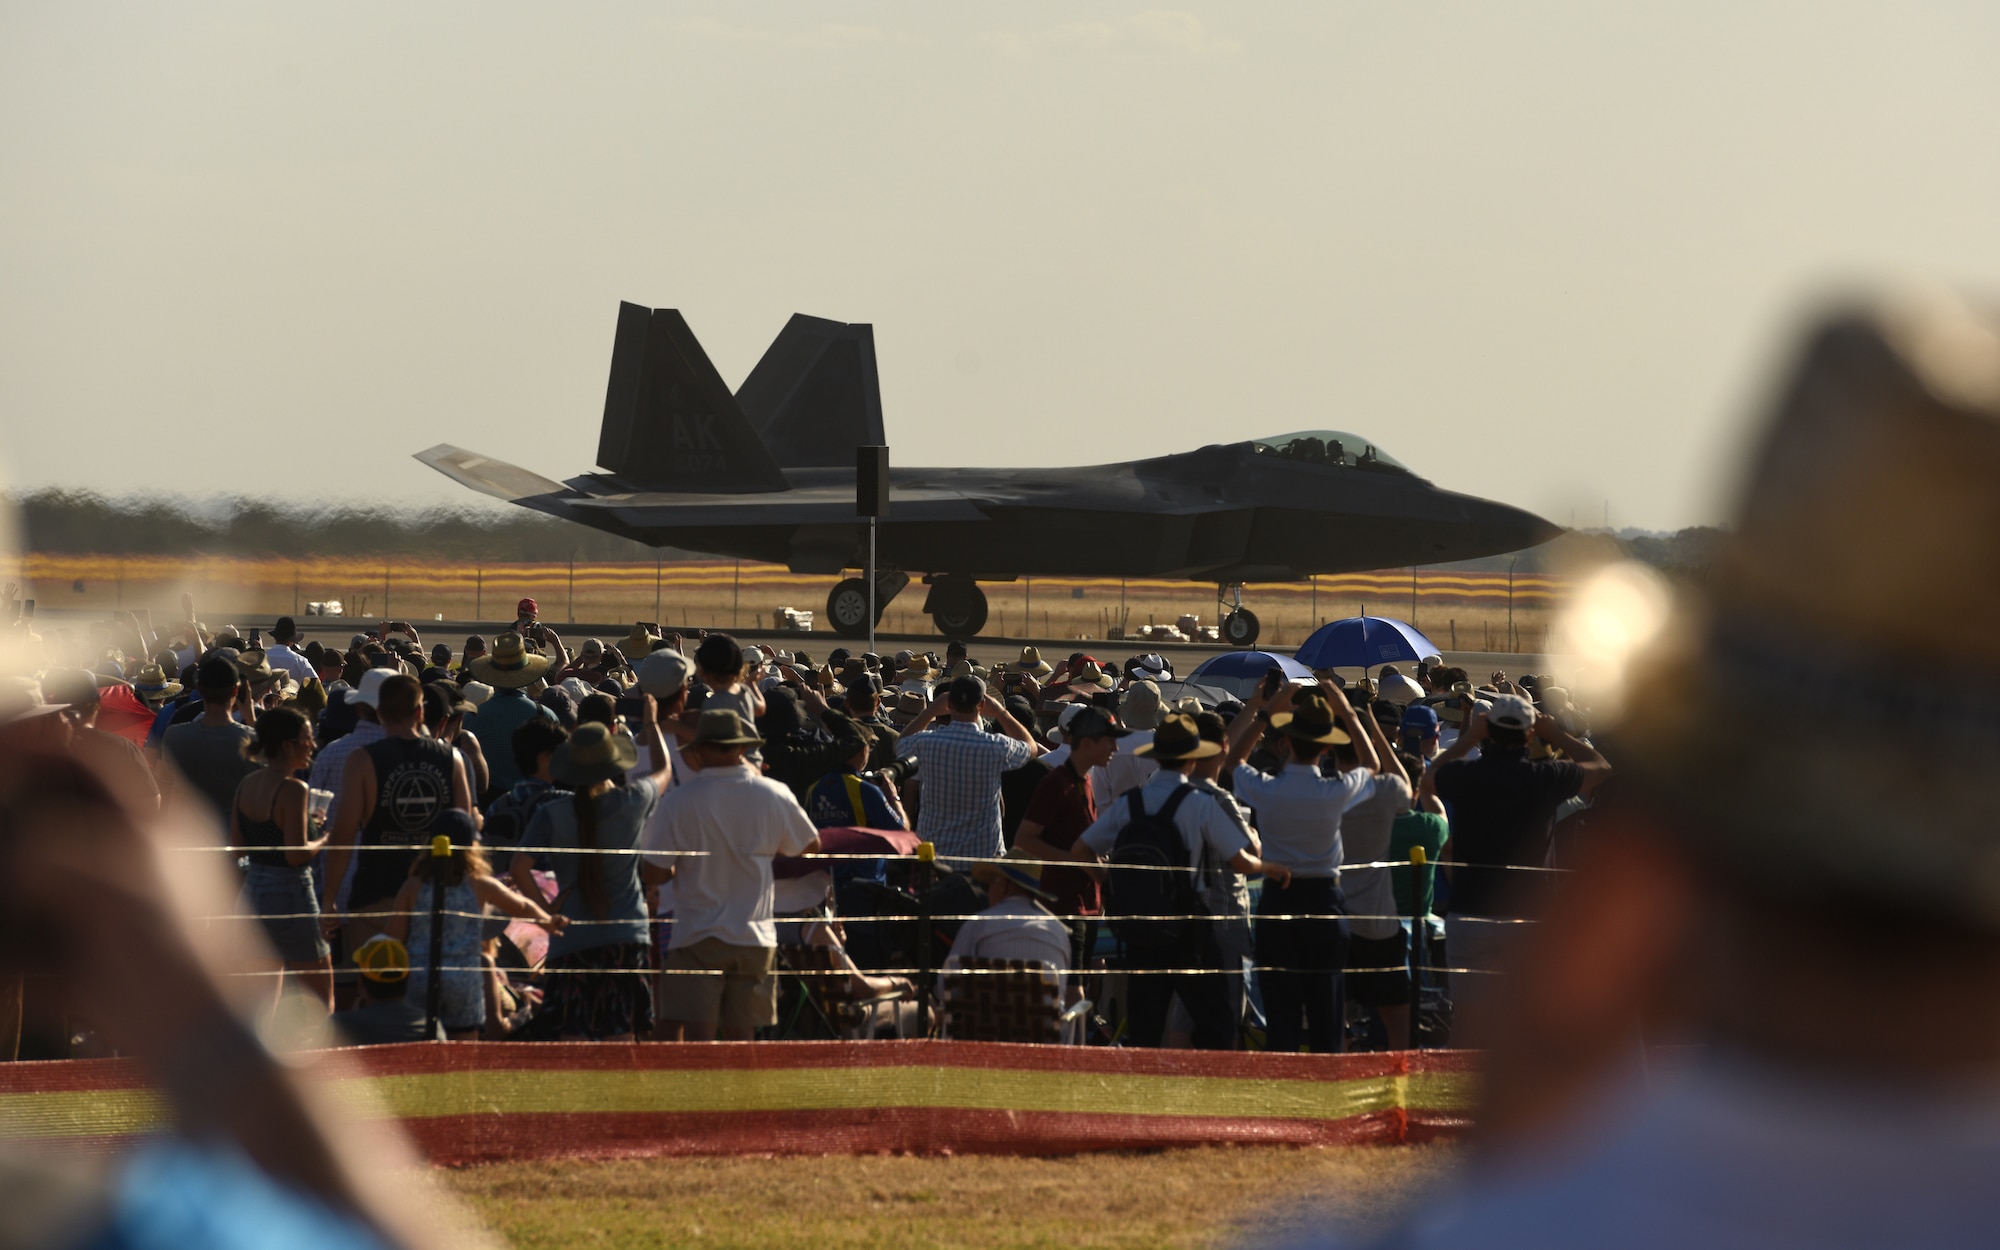 A U.S. Air Force F-22 Raptor assigned to Joint Base Elmendorf-Richardson, Alaska, taxis down the flightline during the 2019 Australian International Airshow and Aerospace & Defence Exposition (AVALON 2019) at Geelong, Victoria, Australia, March 1, 2019.